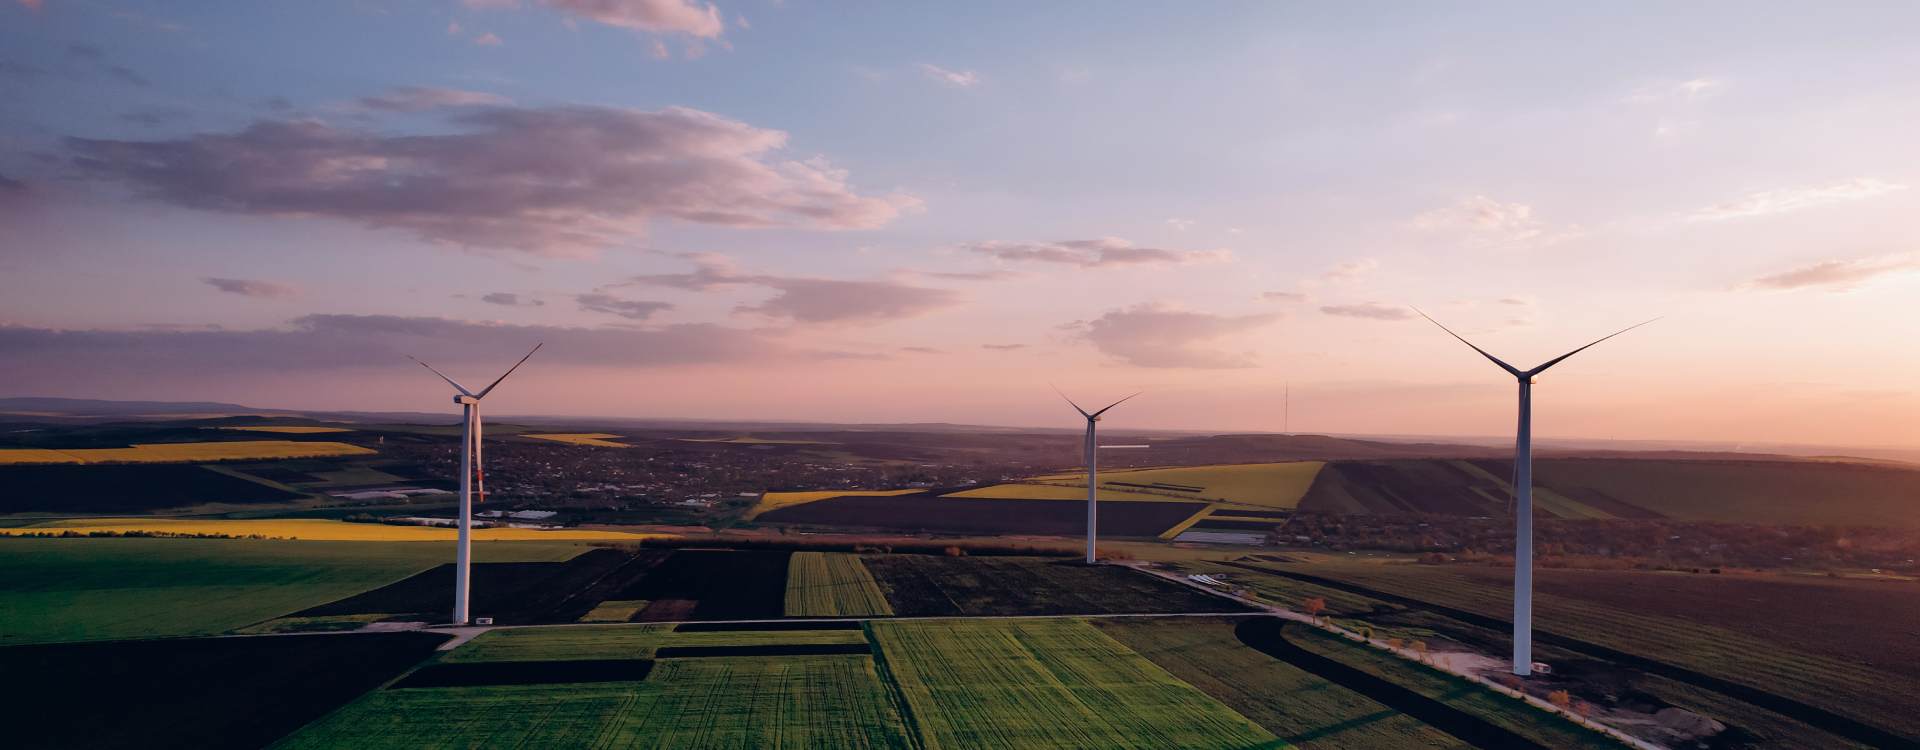 A picture of a wind farm field during sunrise.